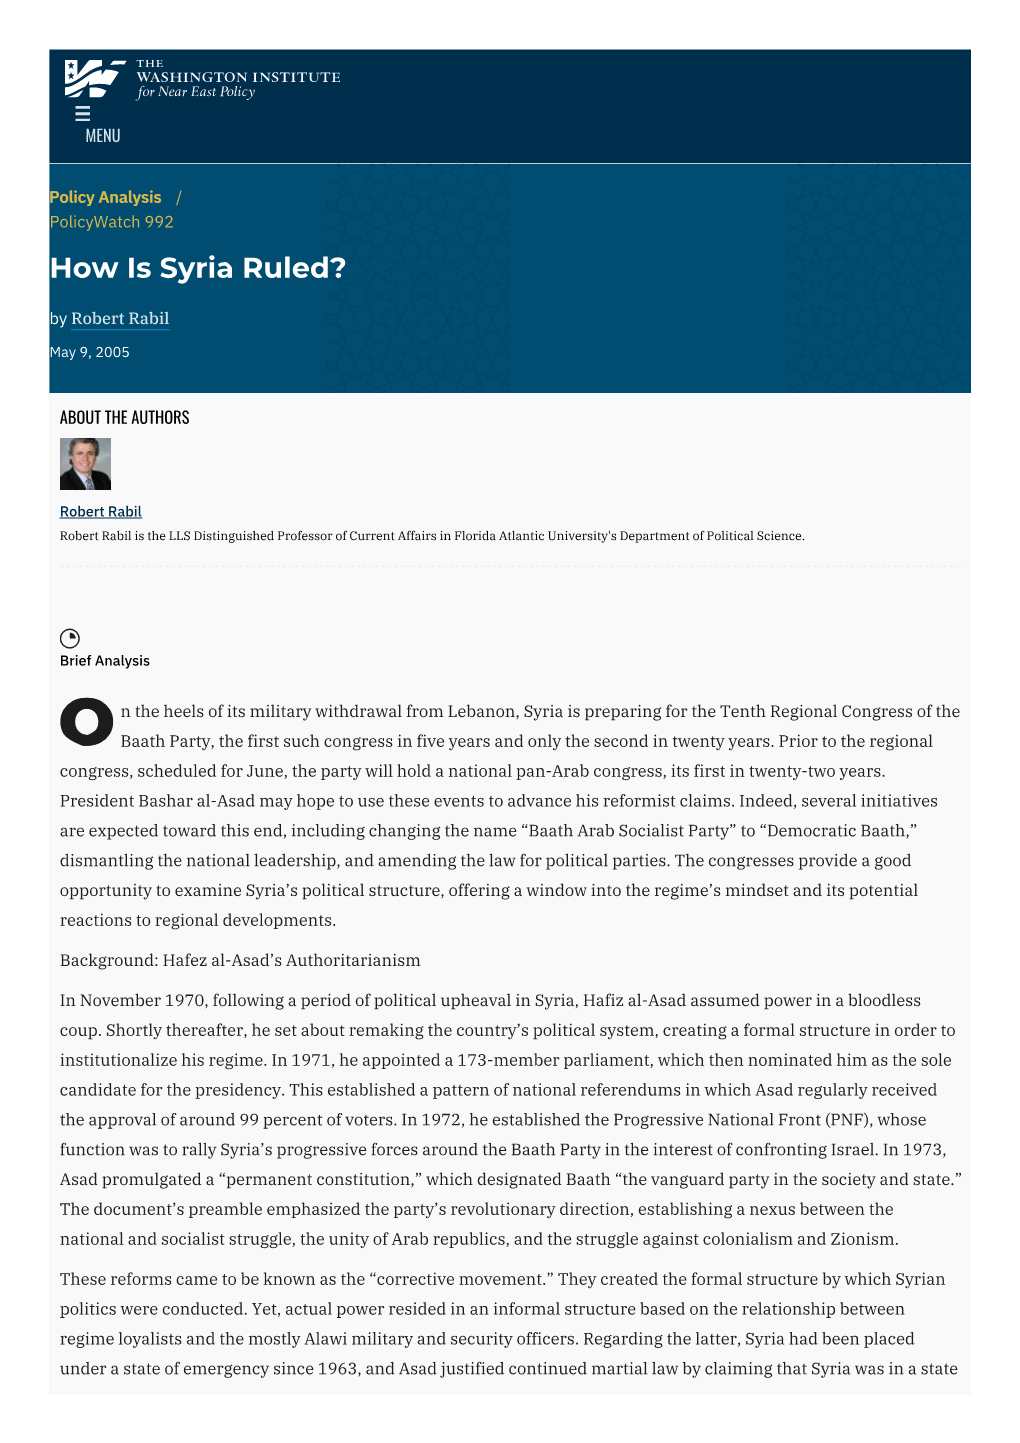 How Is Syria Ruled? | the Washington Institute